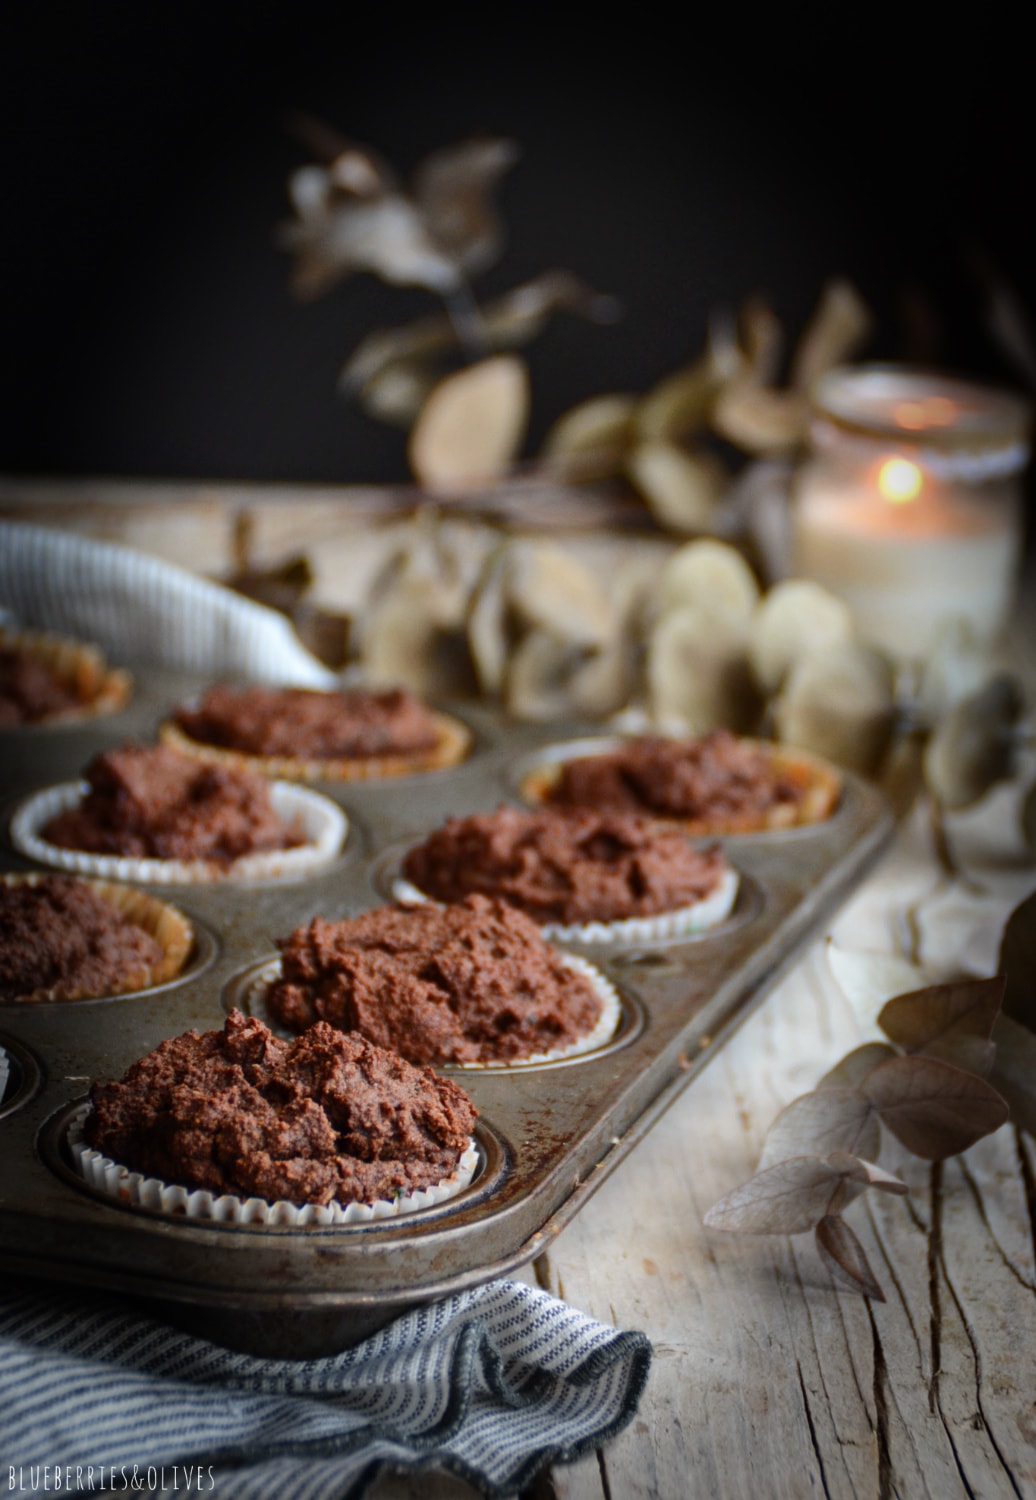 Cocoa muffins in old retro metallic pan, over old wood table, dark background, dry eucalyptus leaves, linen grey kitchen cloth